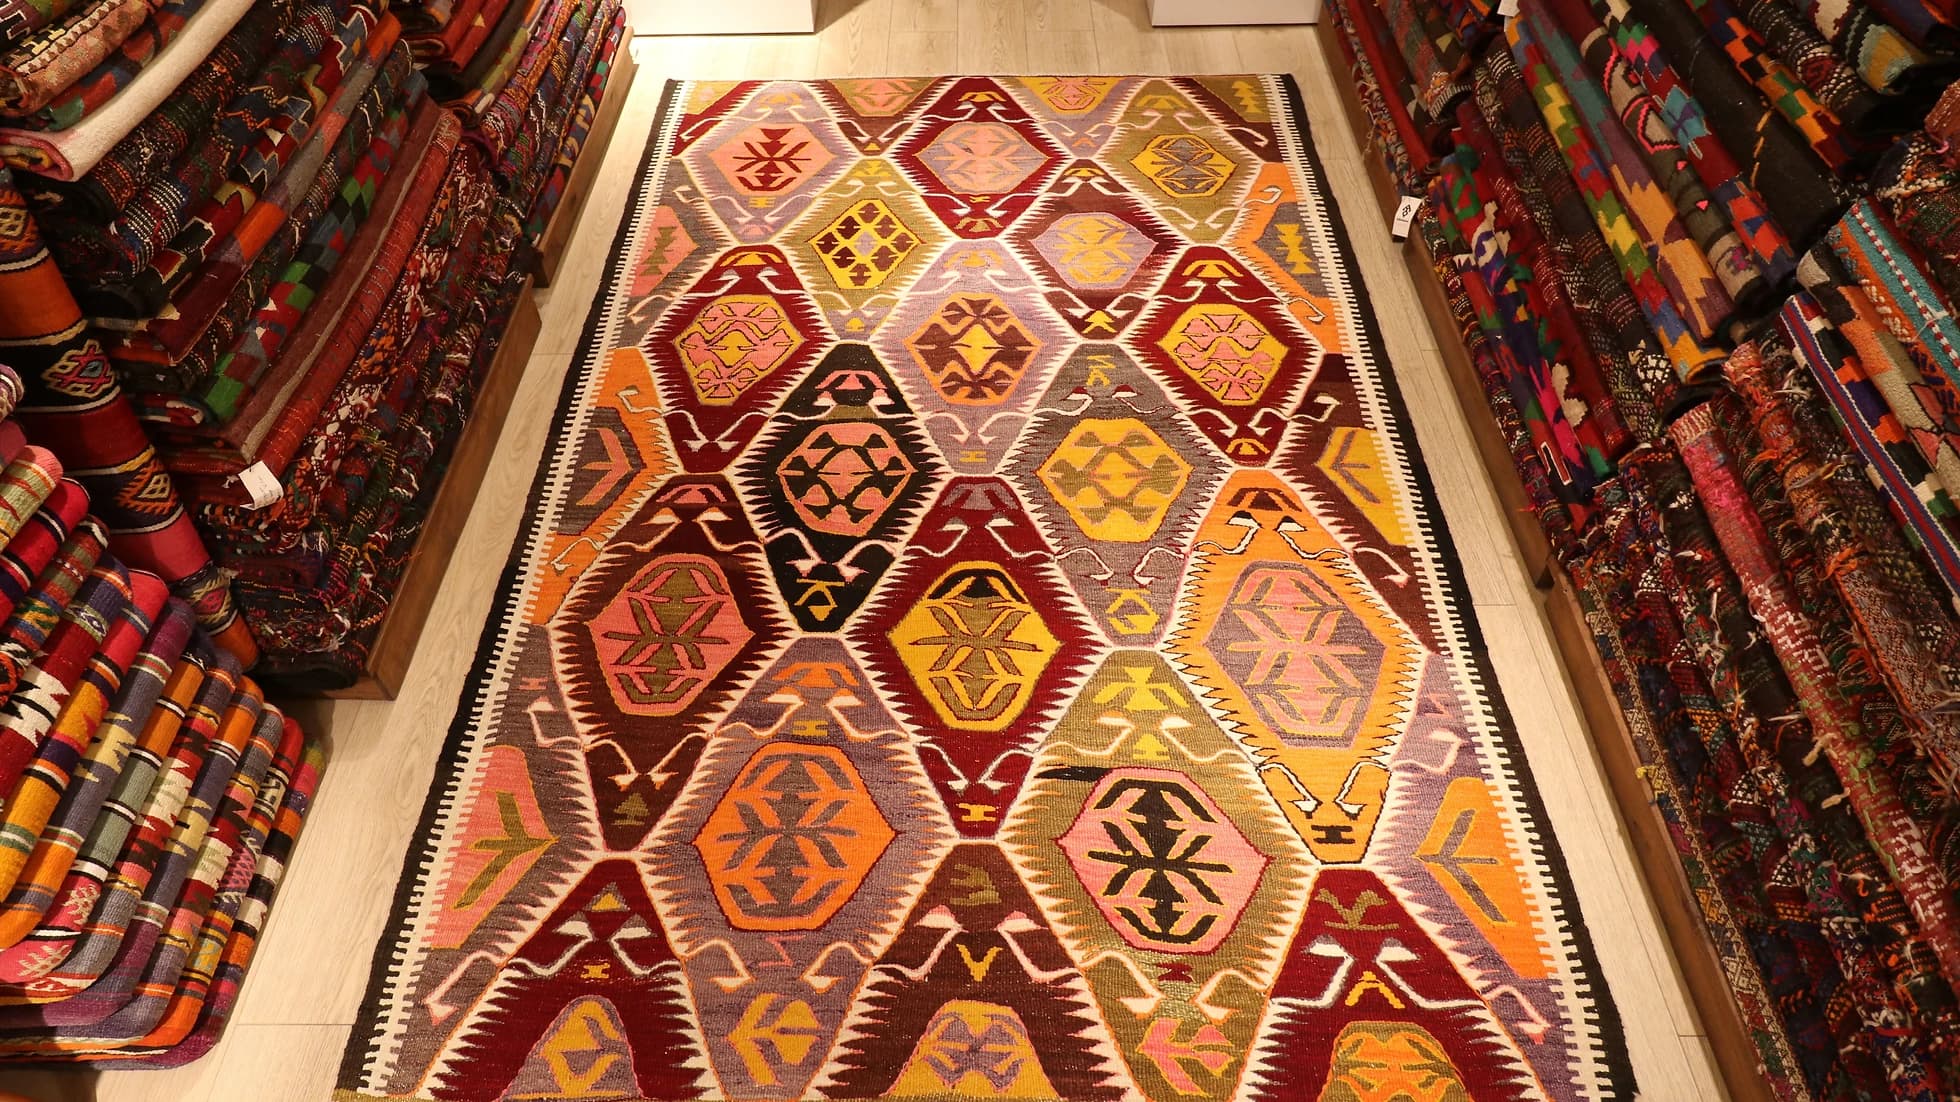 magnificent Turkish tribal kilim rug in pastel and rustic earthy colored medallions and traditional motifs from a vibrant mediterranean city Antalya